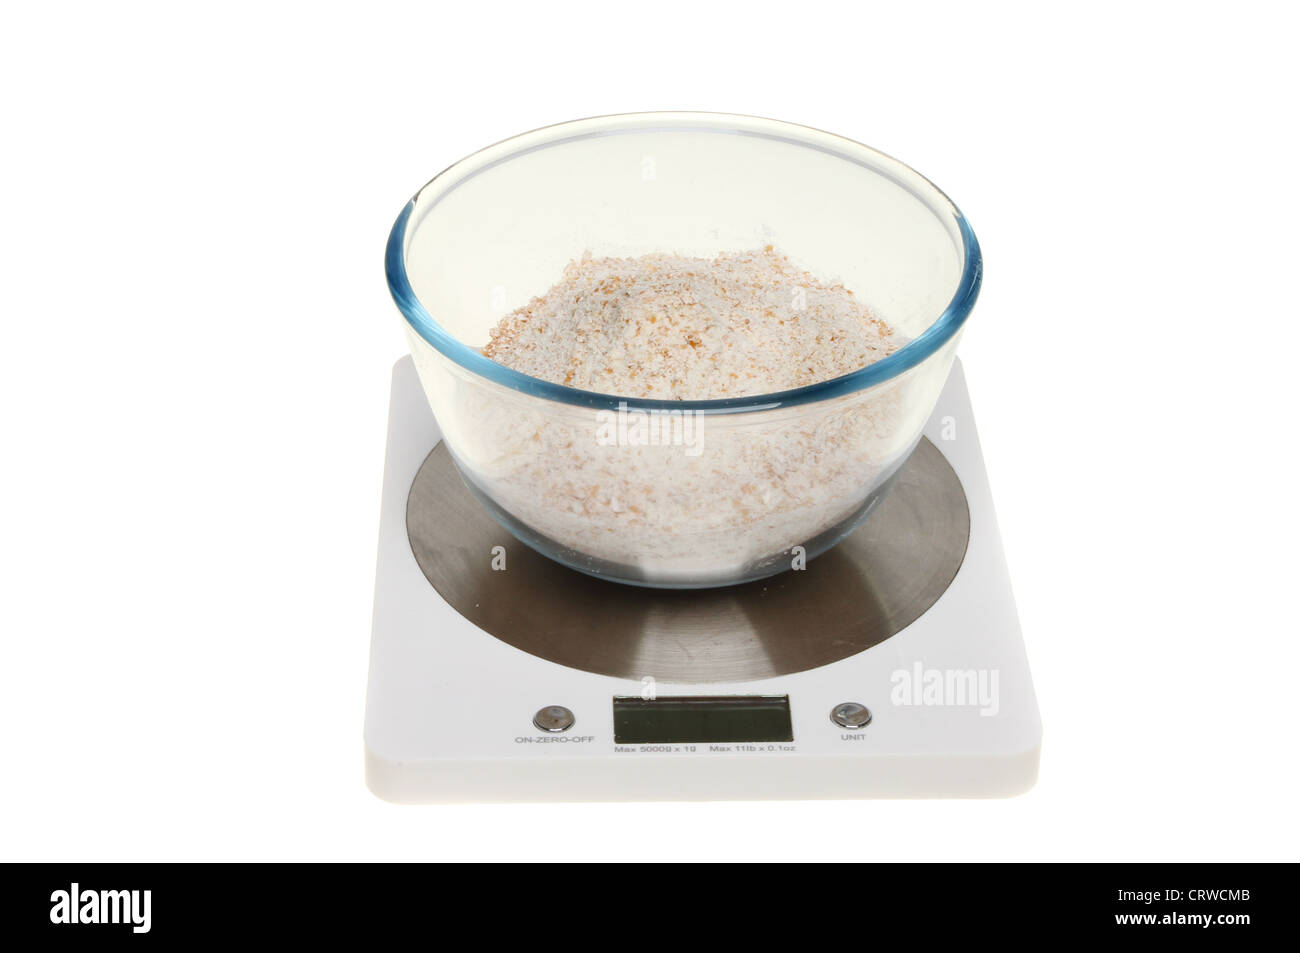 Cook Weighing Hamburger Bun Dough on Scale on Marble Counter Stock Photo -  Image of food, closeup: 272756232